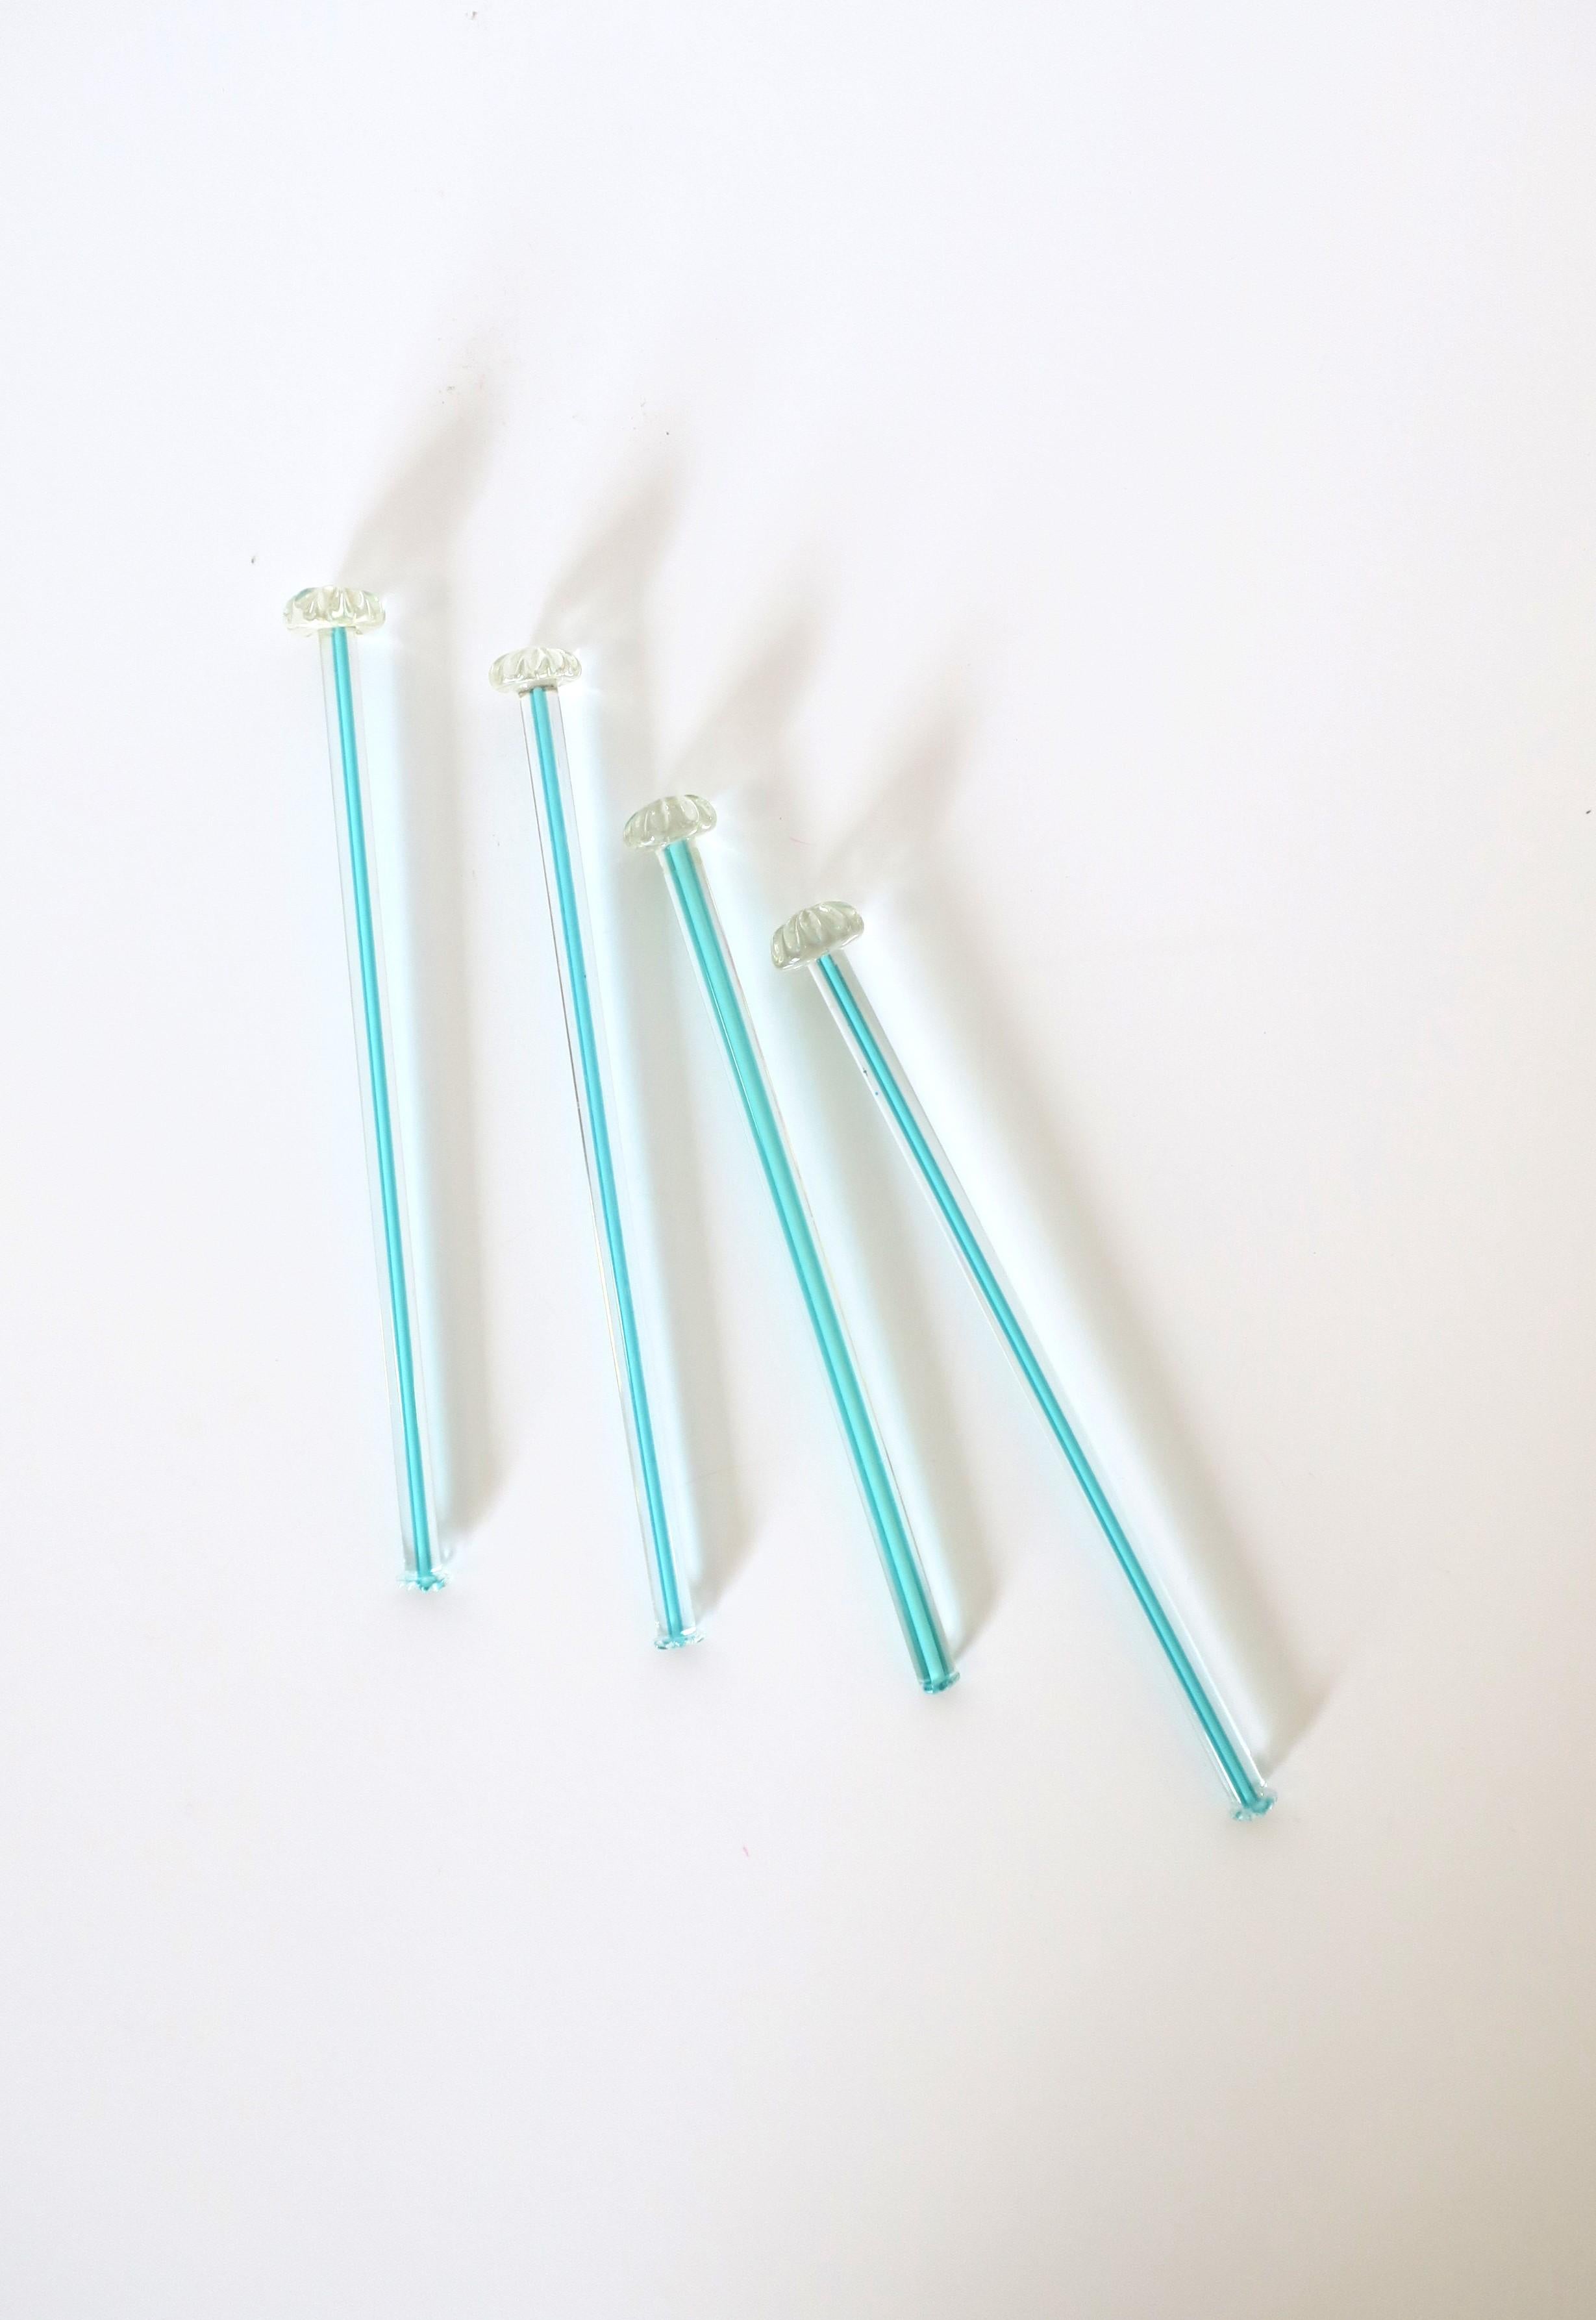 A very beautiful and rare set of four (4) vintage hand crafted Italian Murano barware art glass cocktail stirrers, circa Mid-20th Century, Italy. Set is both transparent / clear and turquoise blue art glass with floweret top and scored bottom.